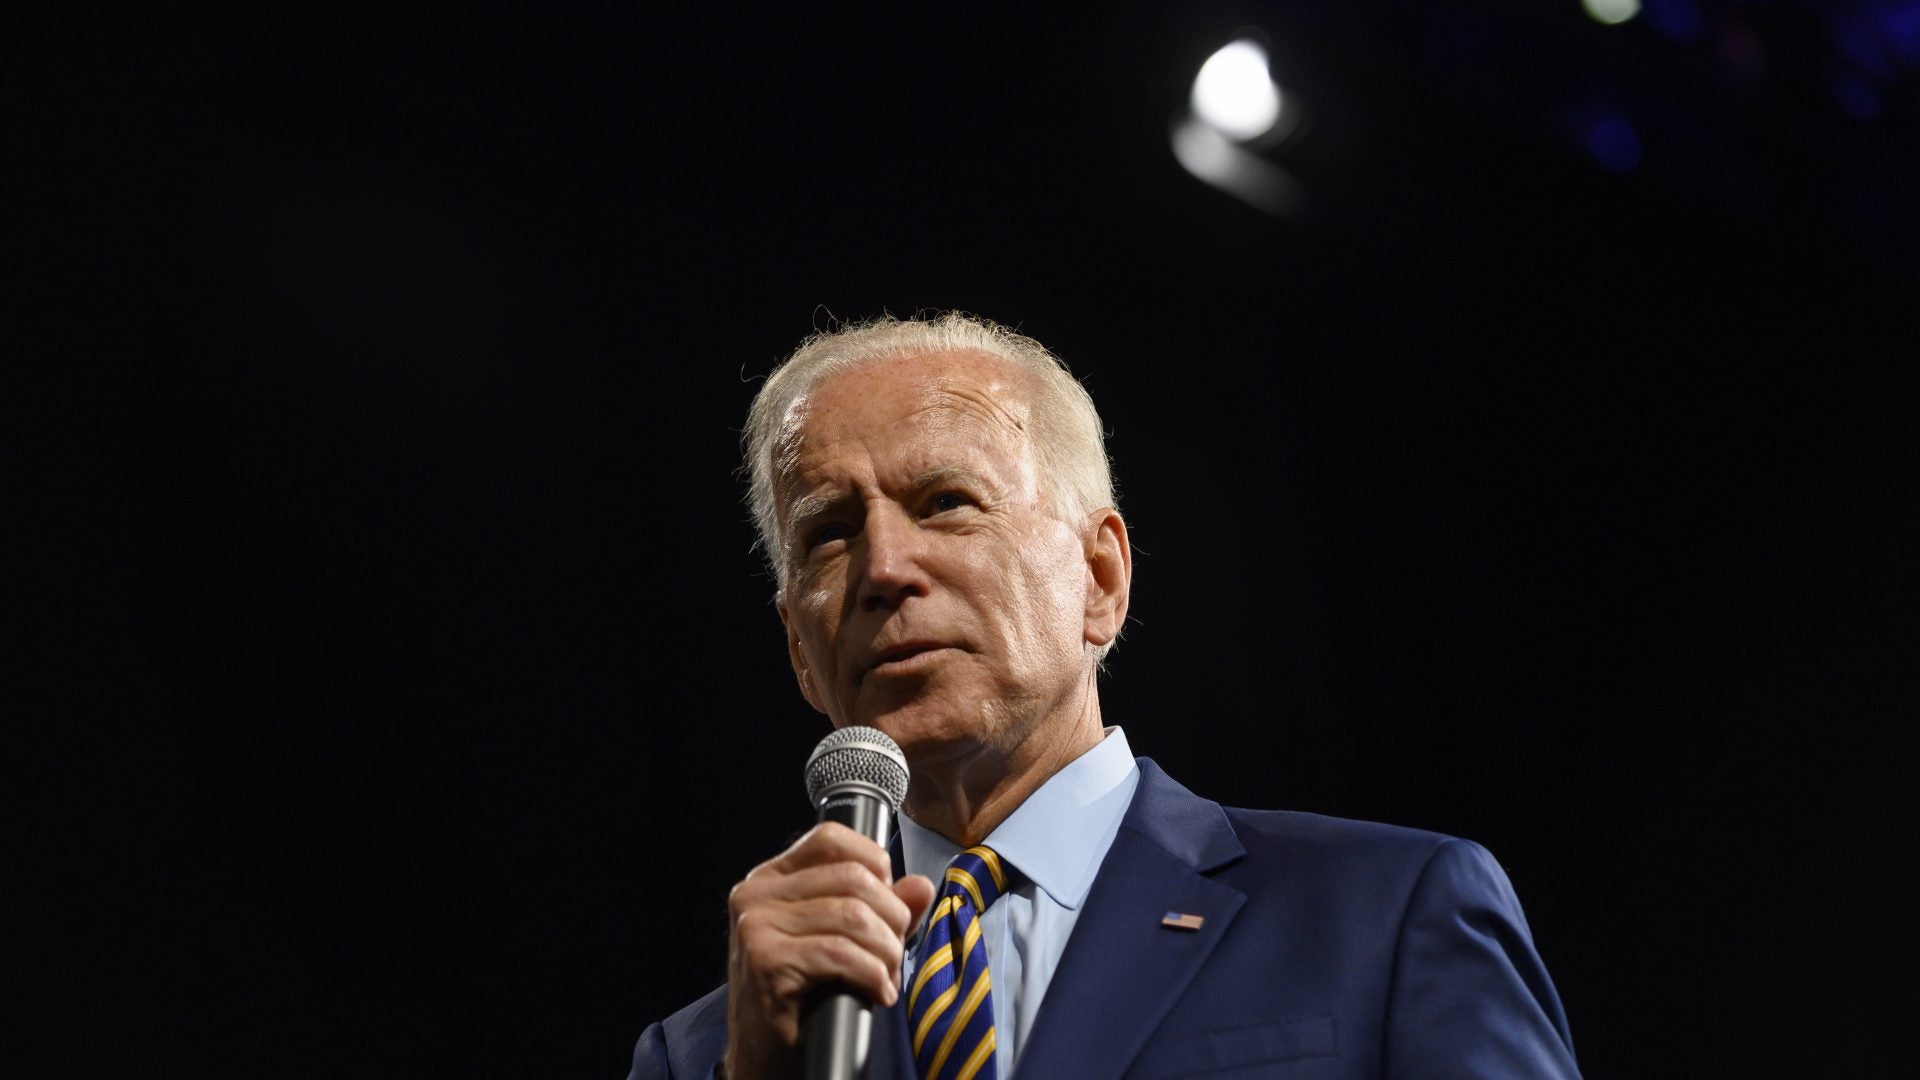 Biden Assures Supporters That He Is 'Confident We Can Win South Carolina'